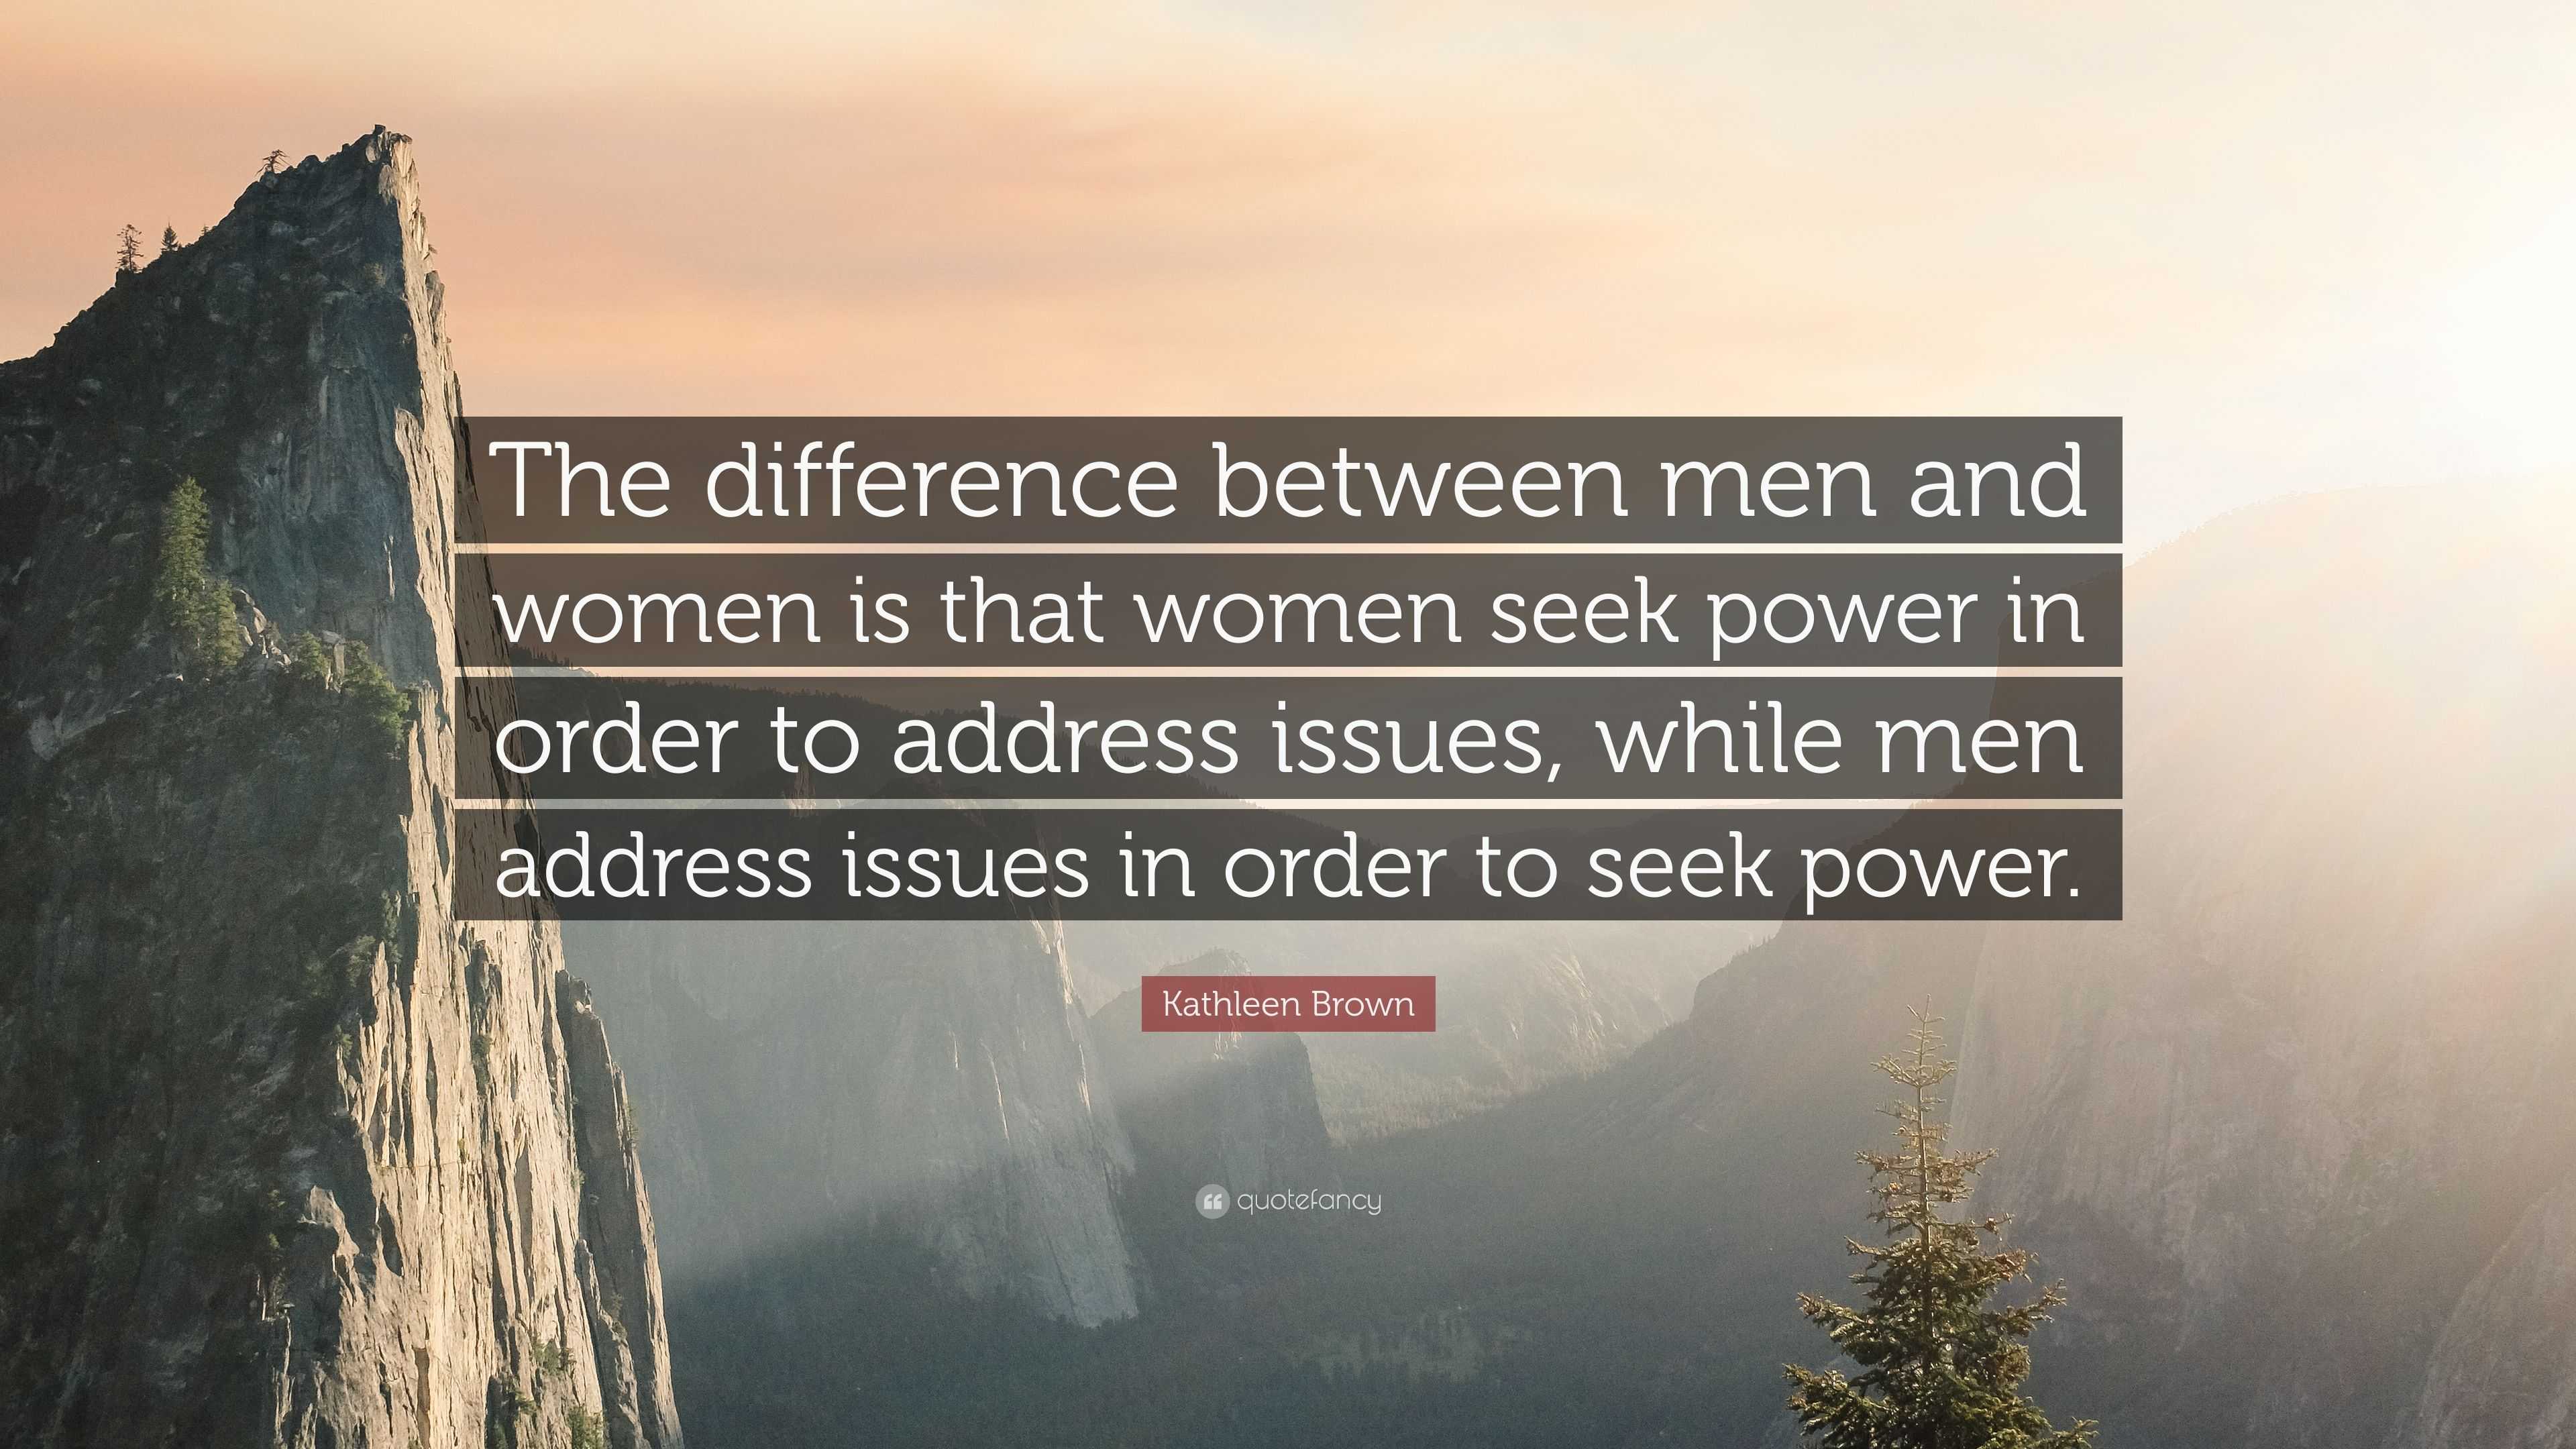 Kathleen Brown Quote: “The difference between men and women is that ...